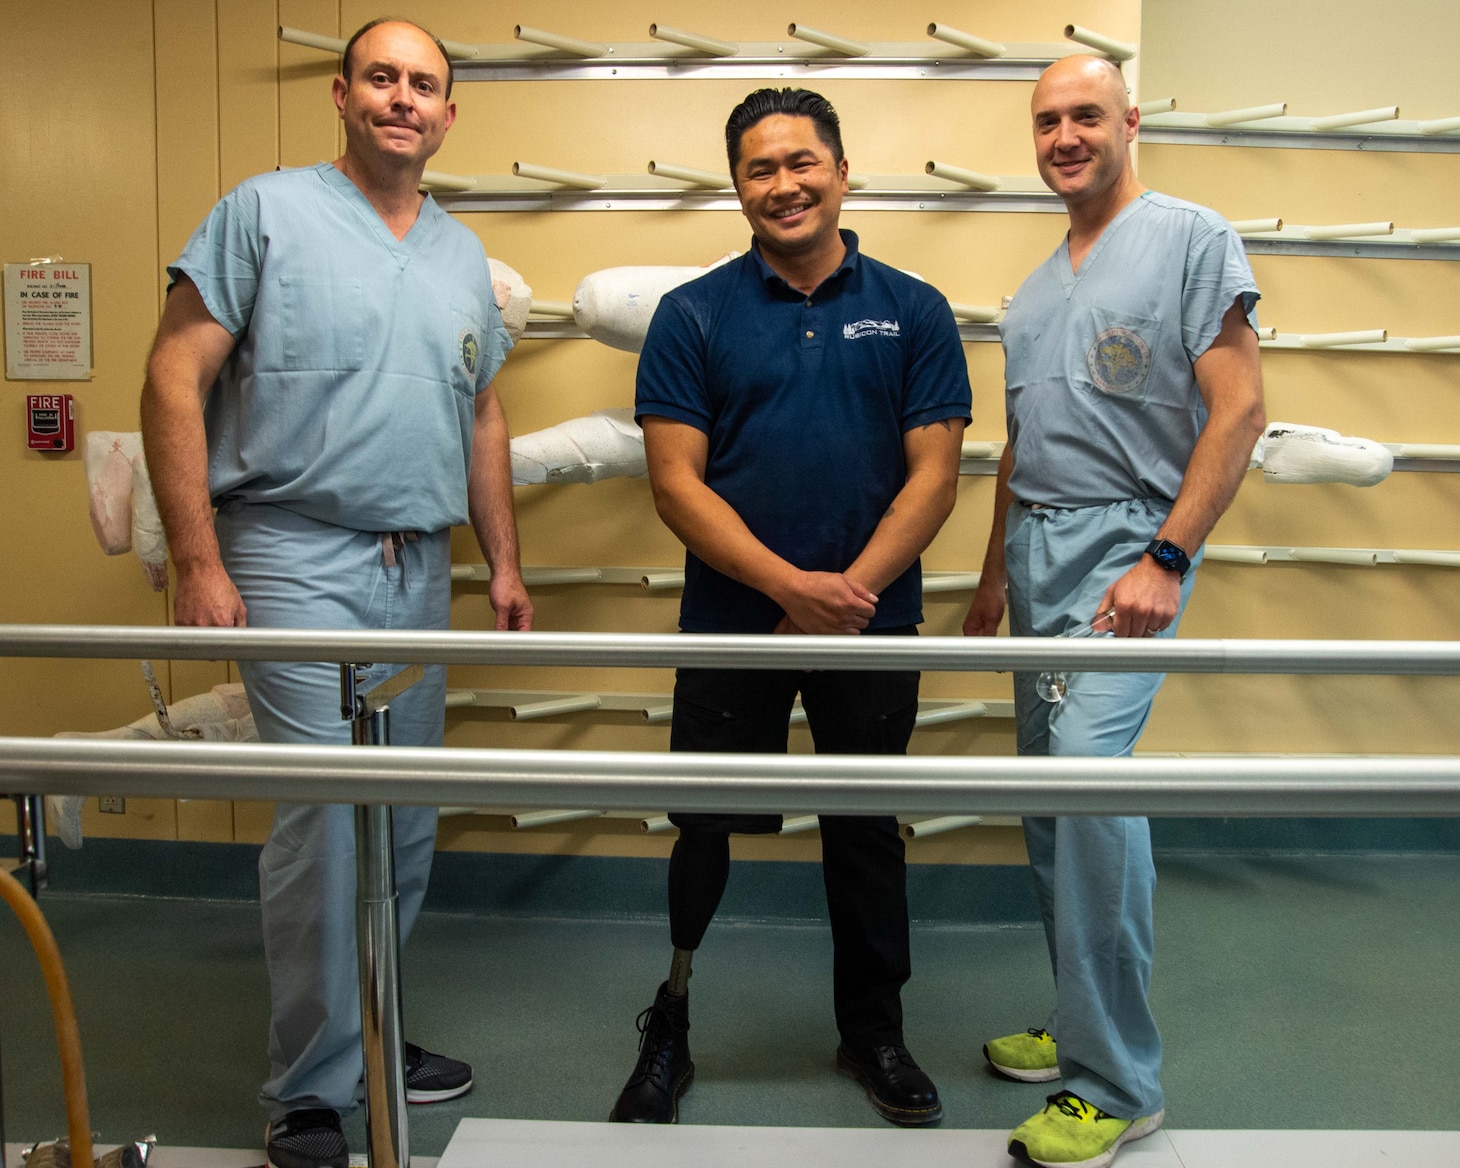 SAN DIEGO (May. 24, 2023) Naval Medical Center San Diego's (NMCSD) Osseo-Prosthetics team, comprised of Cmdr. Yan Ortiz-Pomales, specialty leader for Plastic Surgery in the Navy, left, Nathaniel Ortiz, Lead Prosthetist, center, and Cmdr. James Flint, NMCSD Orthopedic Oncology Surgeon, right, pose for a group photo. NMCSD's mission is to prepare service members to deploy in support of operational forces, deliver high quality healthcare services and shape the future of military medicine through education, training and research. NMCSD employs more than 6,000 active duty military personnel, civilians and contractors in Southern California to provide patients with world-class care anytime, anywhere. (U.S. Navy photo by Mass Communication Specialist Seaman Raphael McCorey)